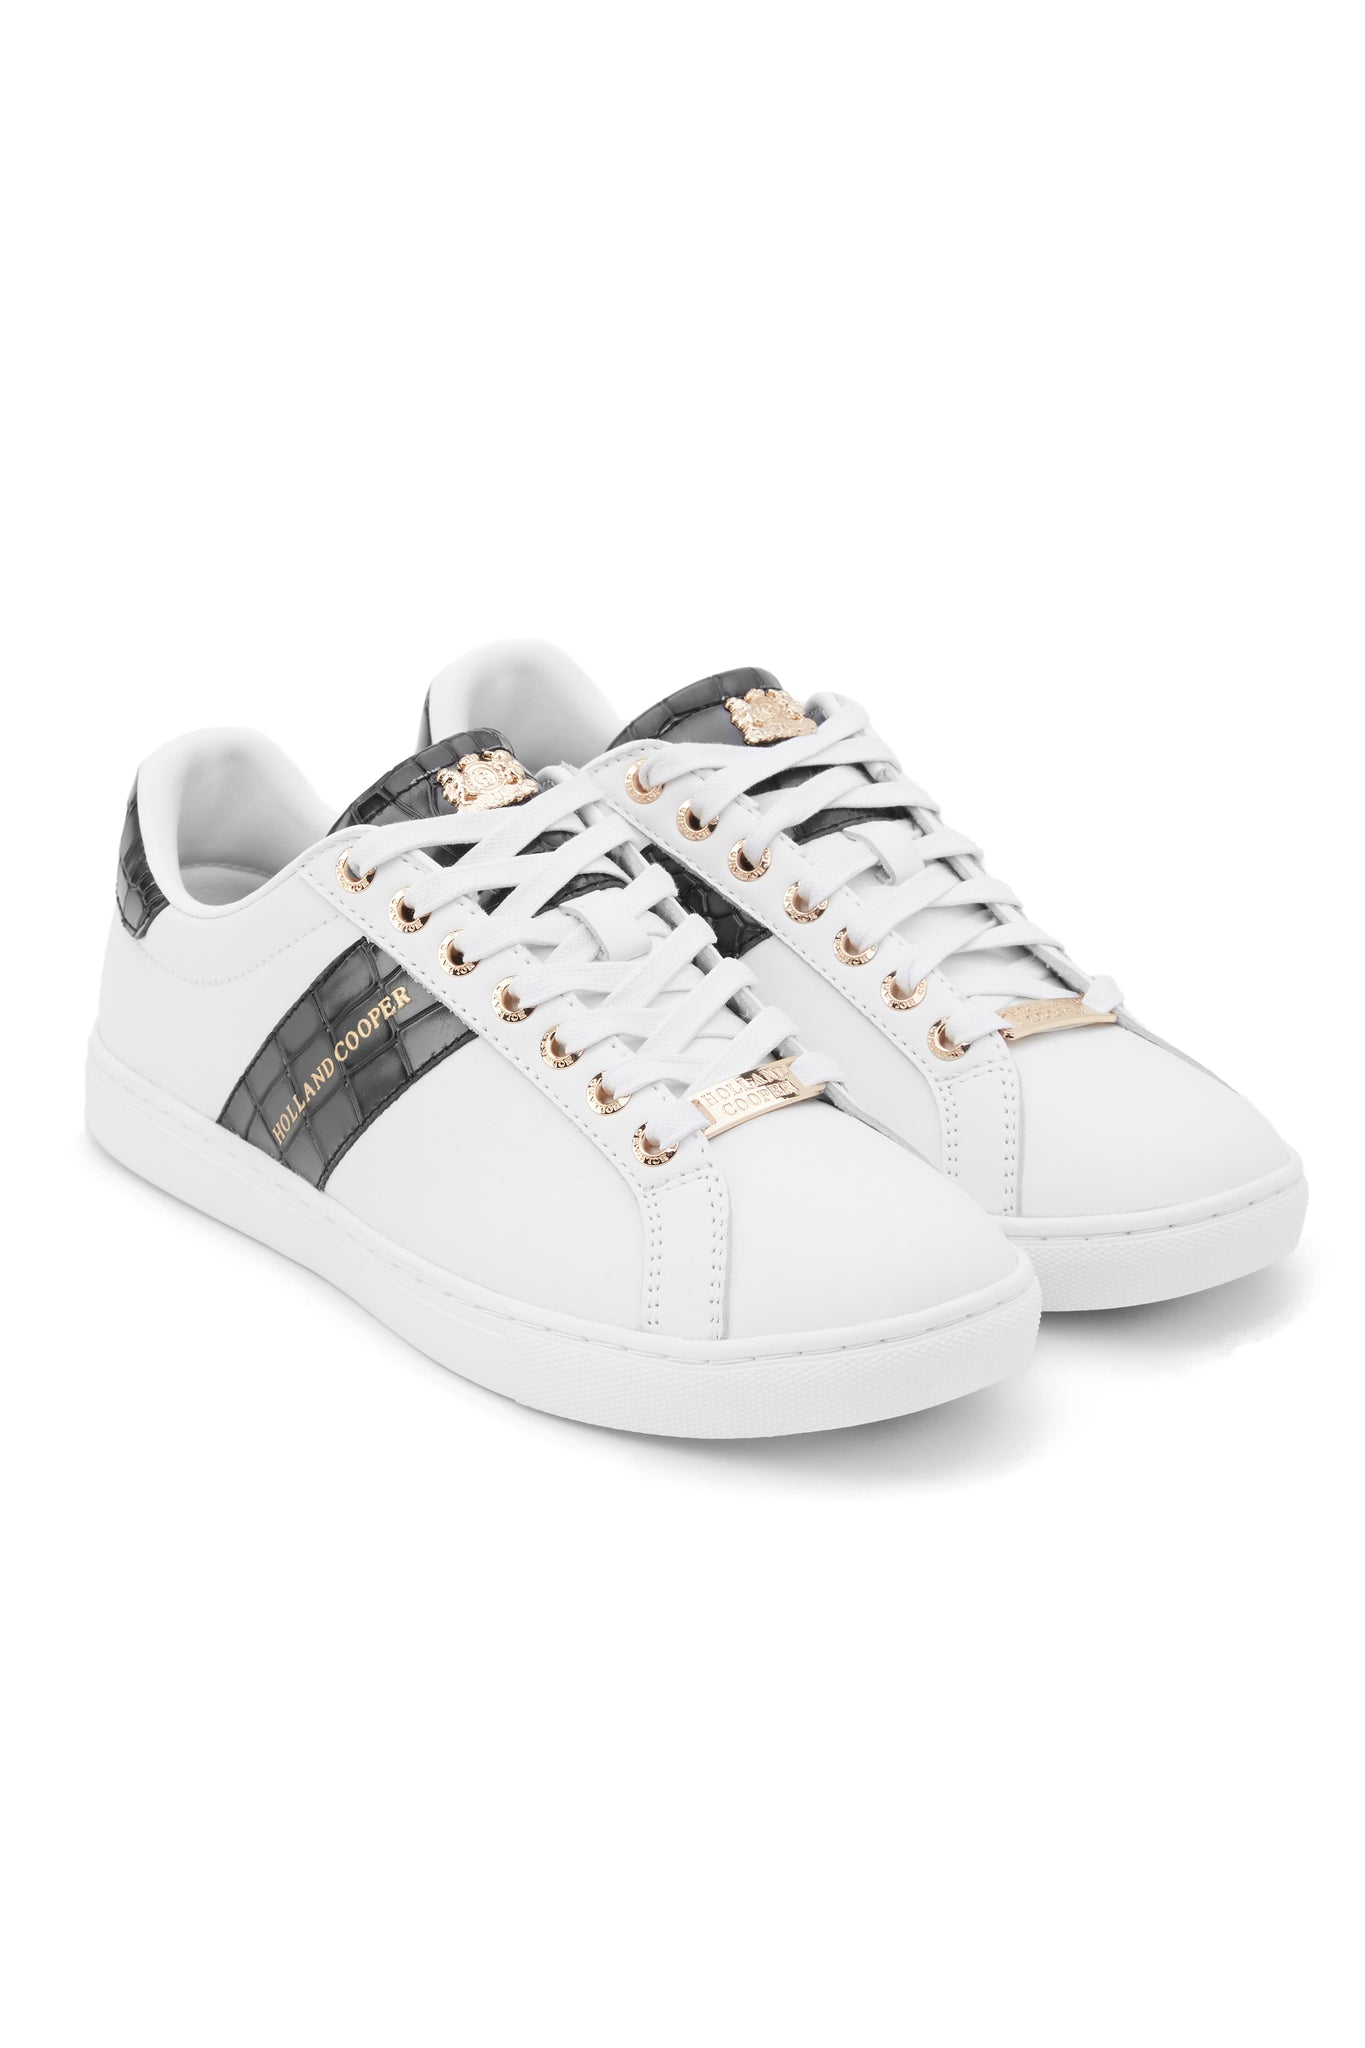 white leather trainers with white laces detailed with a diagonal stripe of black croc embossed leather on the side with gold foil branding and a black croc embossed leather tongue and heel with gold hardware 